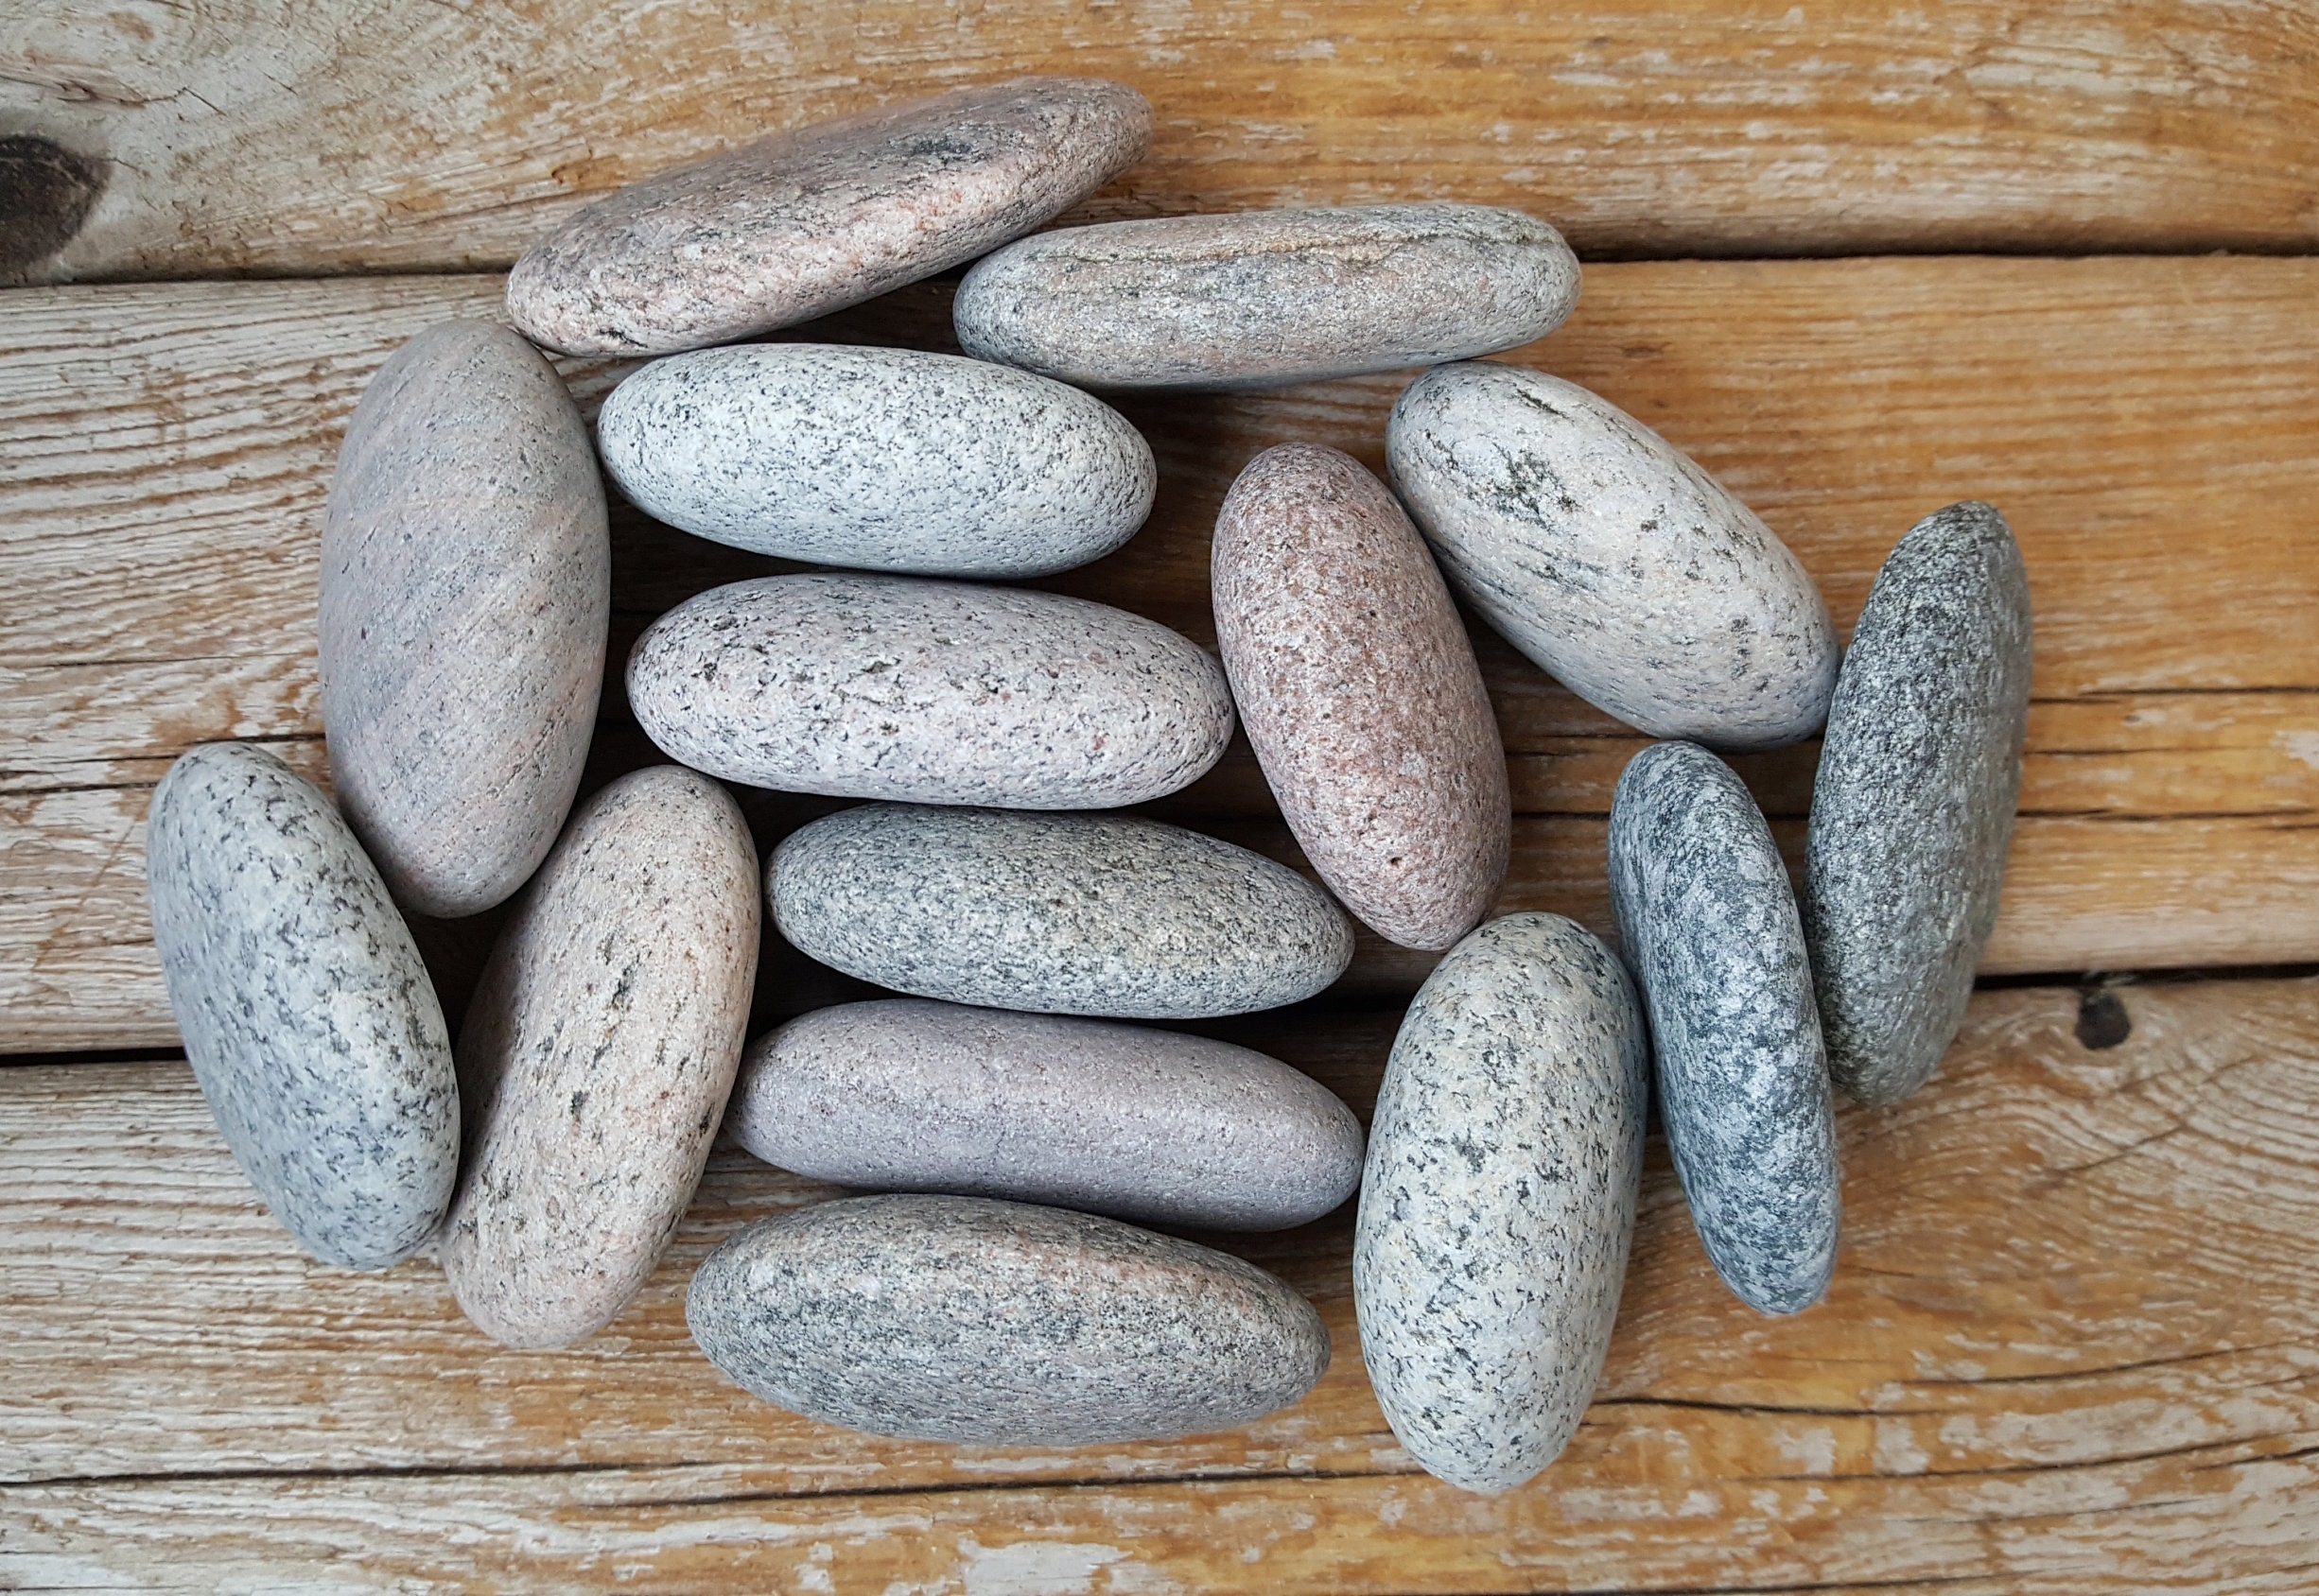 2.362.75large Sea Stones stones for Painting beach Stones mandala Stones-stones  for Crafts Mandala Rocks 